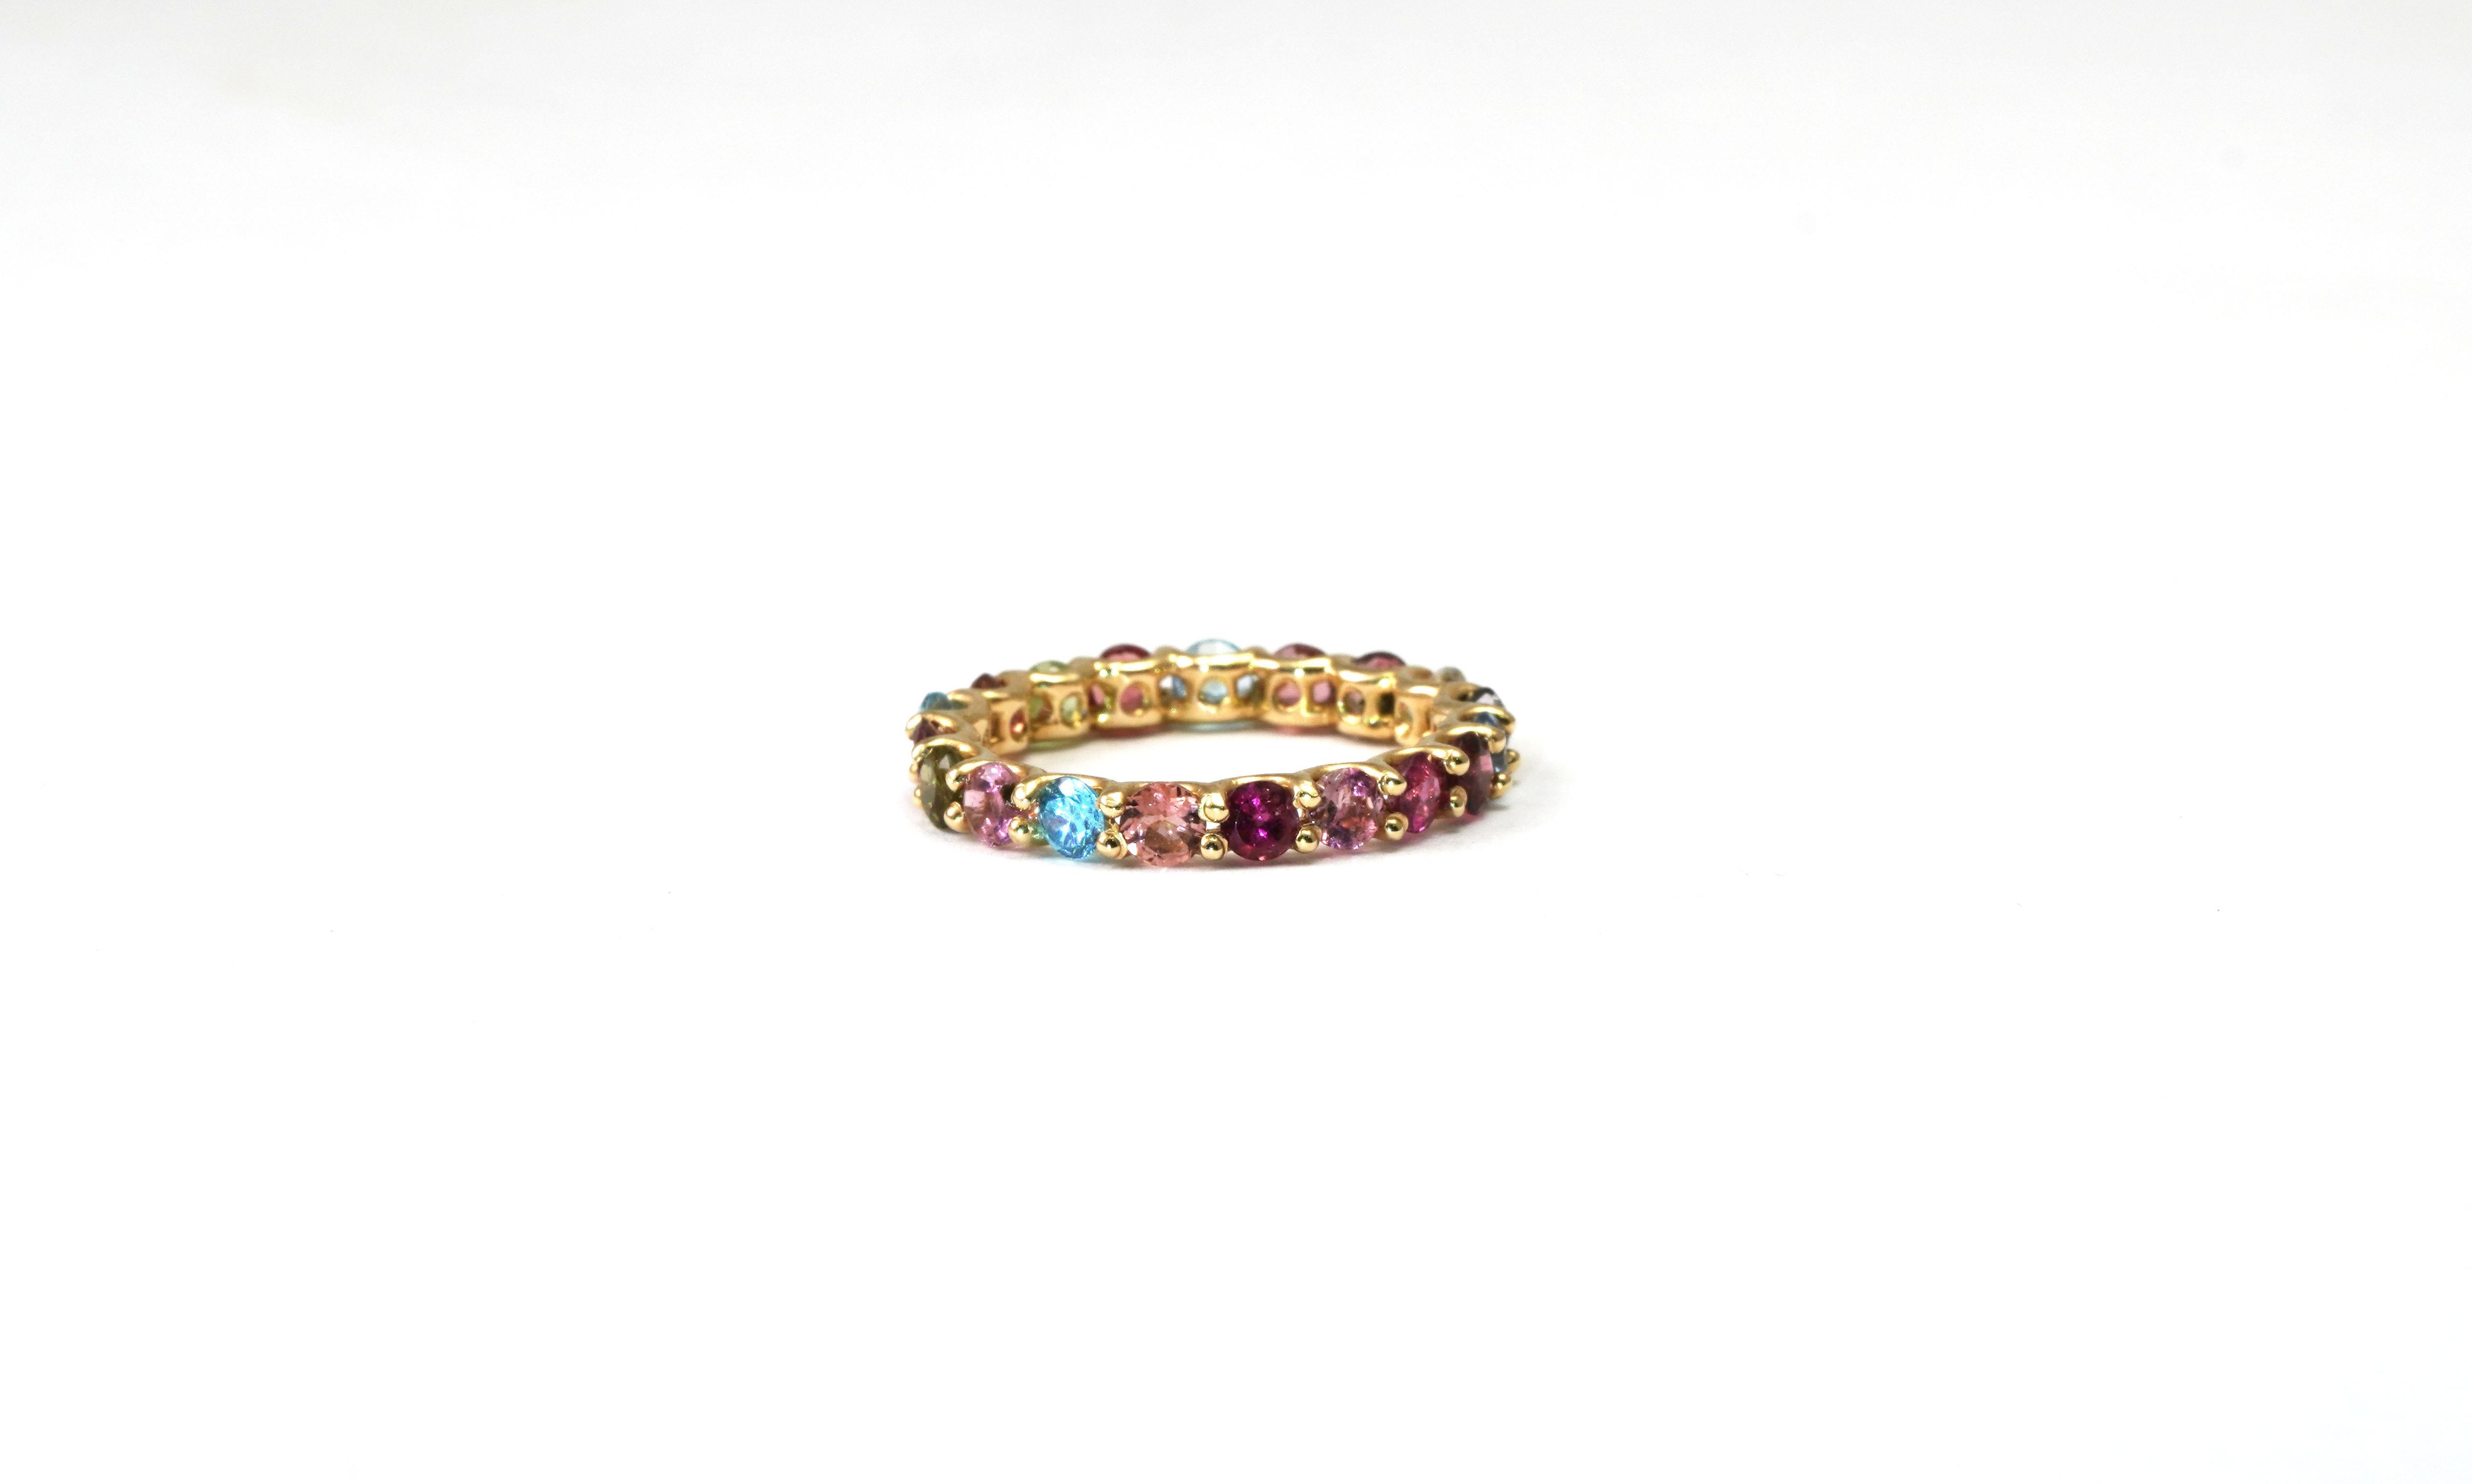 14 kt Gold ring with MultiColor Tourmaline
Gold color: Yellow
Ring size: 5 1/2 US
Total weight: 2.04 grams

Set with:
- Tourmaline x 19
Cut: Brilliant
Color: MultiColor